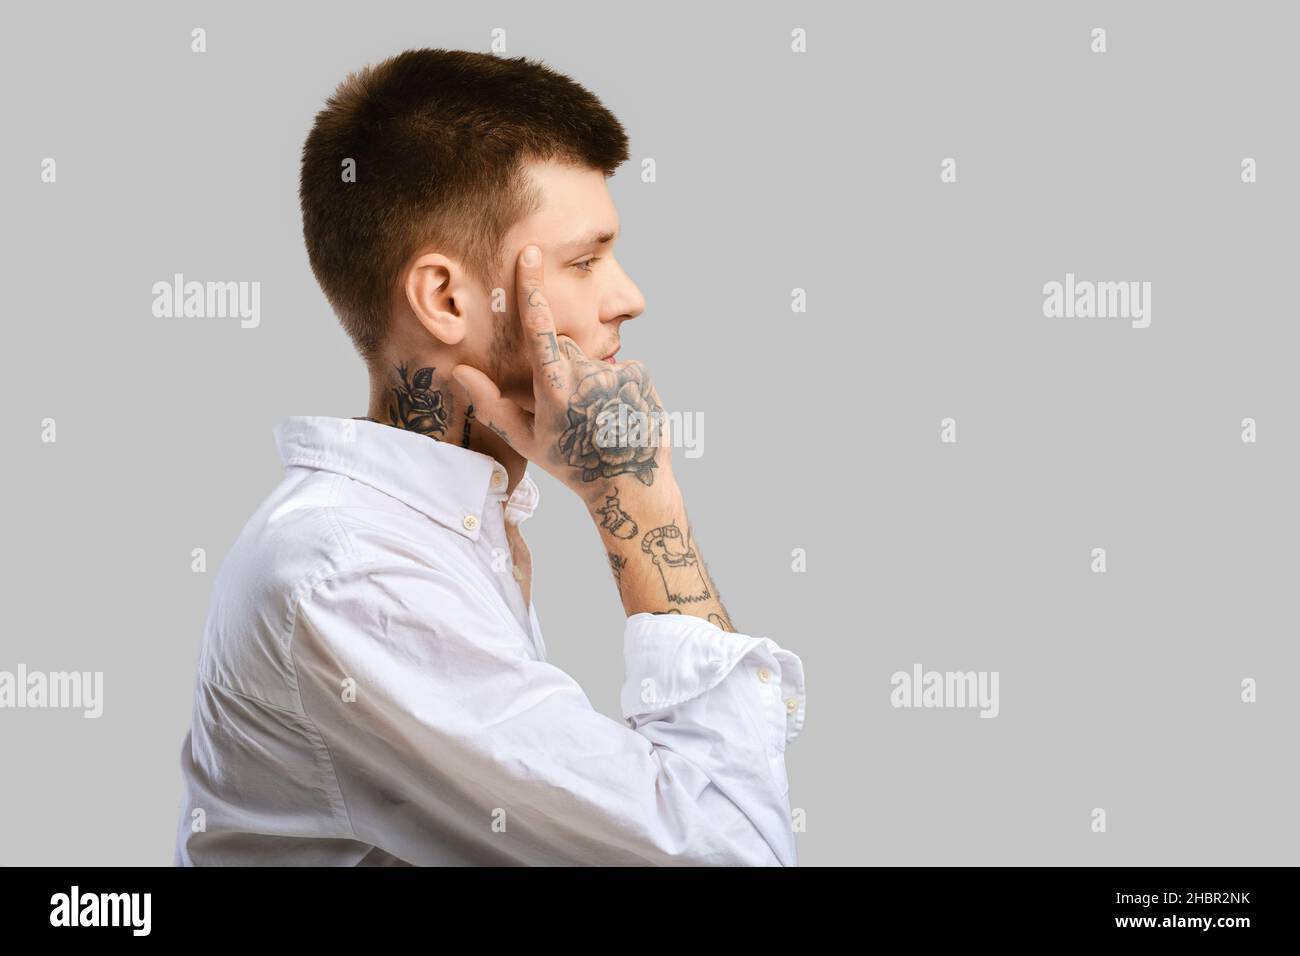 Young man touching his temple with a finger, standing in profile Stock Photo